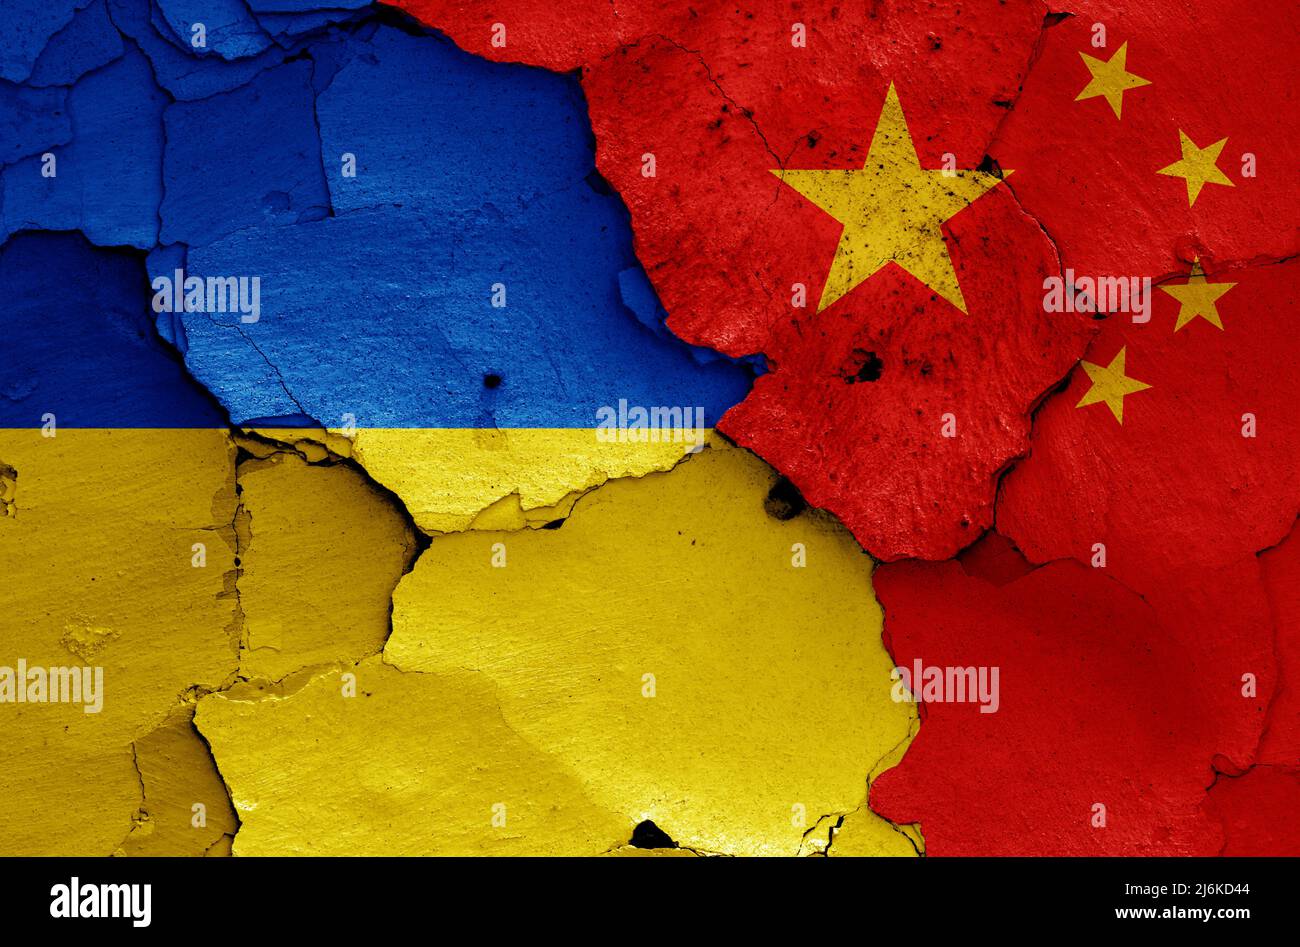 flags of Ukraine and China painted on cracked wall Stock Photo